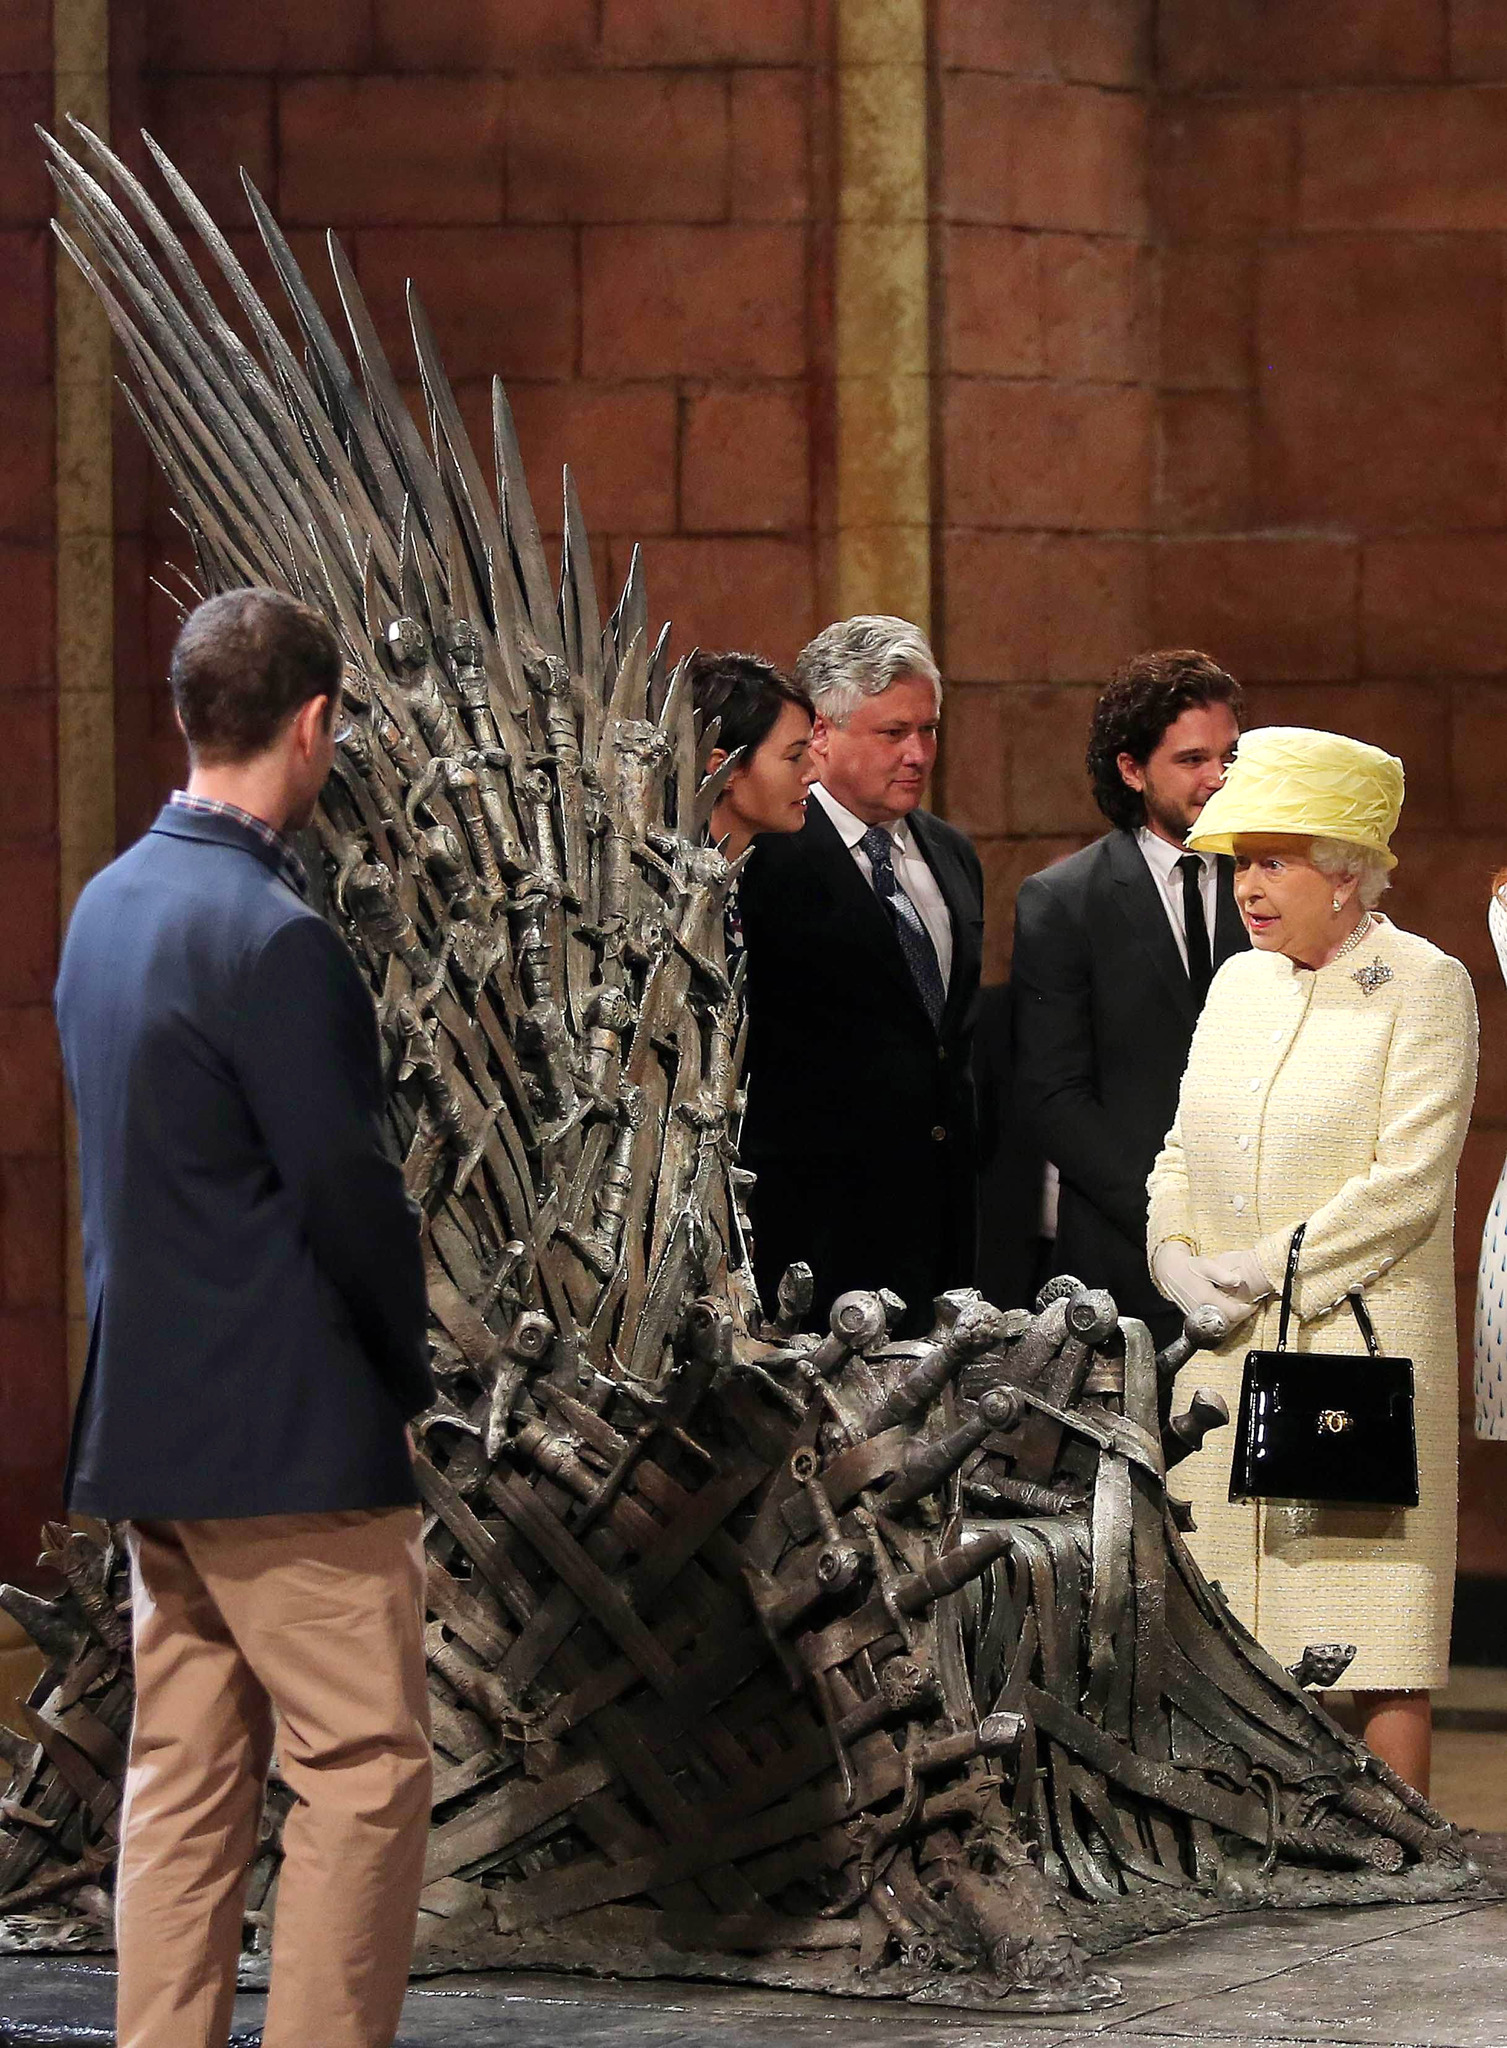 Queen Elizabeth II meets cast members of the HBO TV series 'Game of Thrones' Lena Headey and Conleth Hill as she views some of the props including the Iron Throne on set in Belfast's Titanic Quarter on June 24, 2014 in Belfast, Northern Ireland. The Royal party are visiting Northern Ireland for three days.